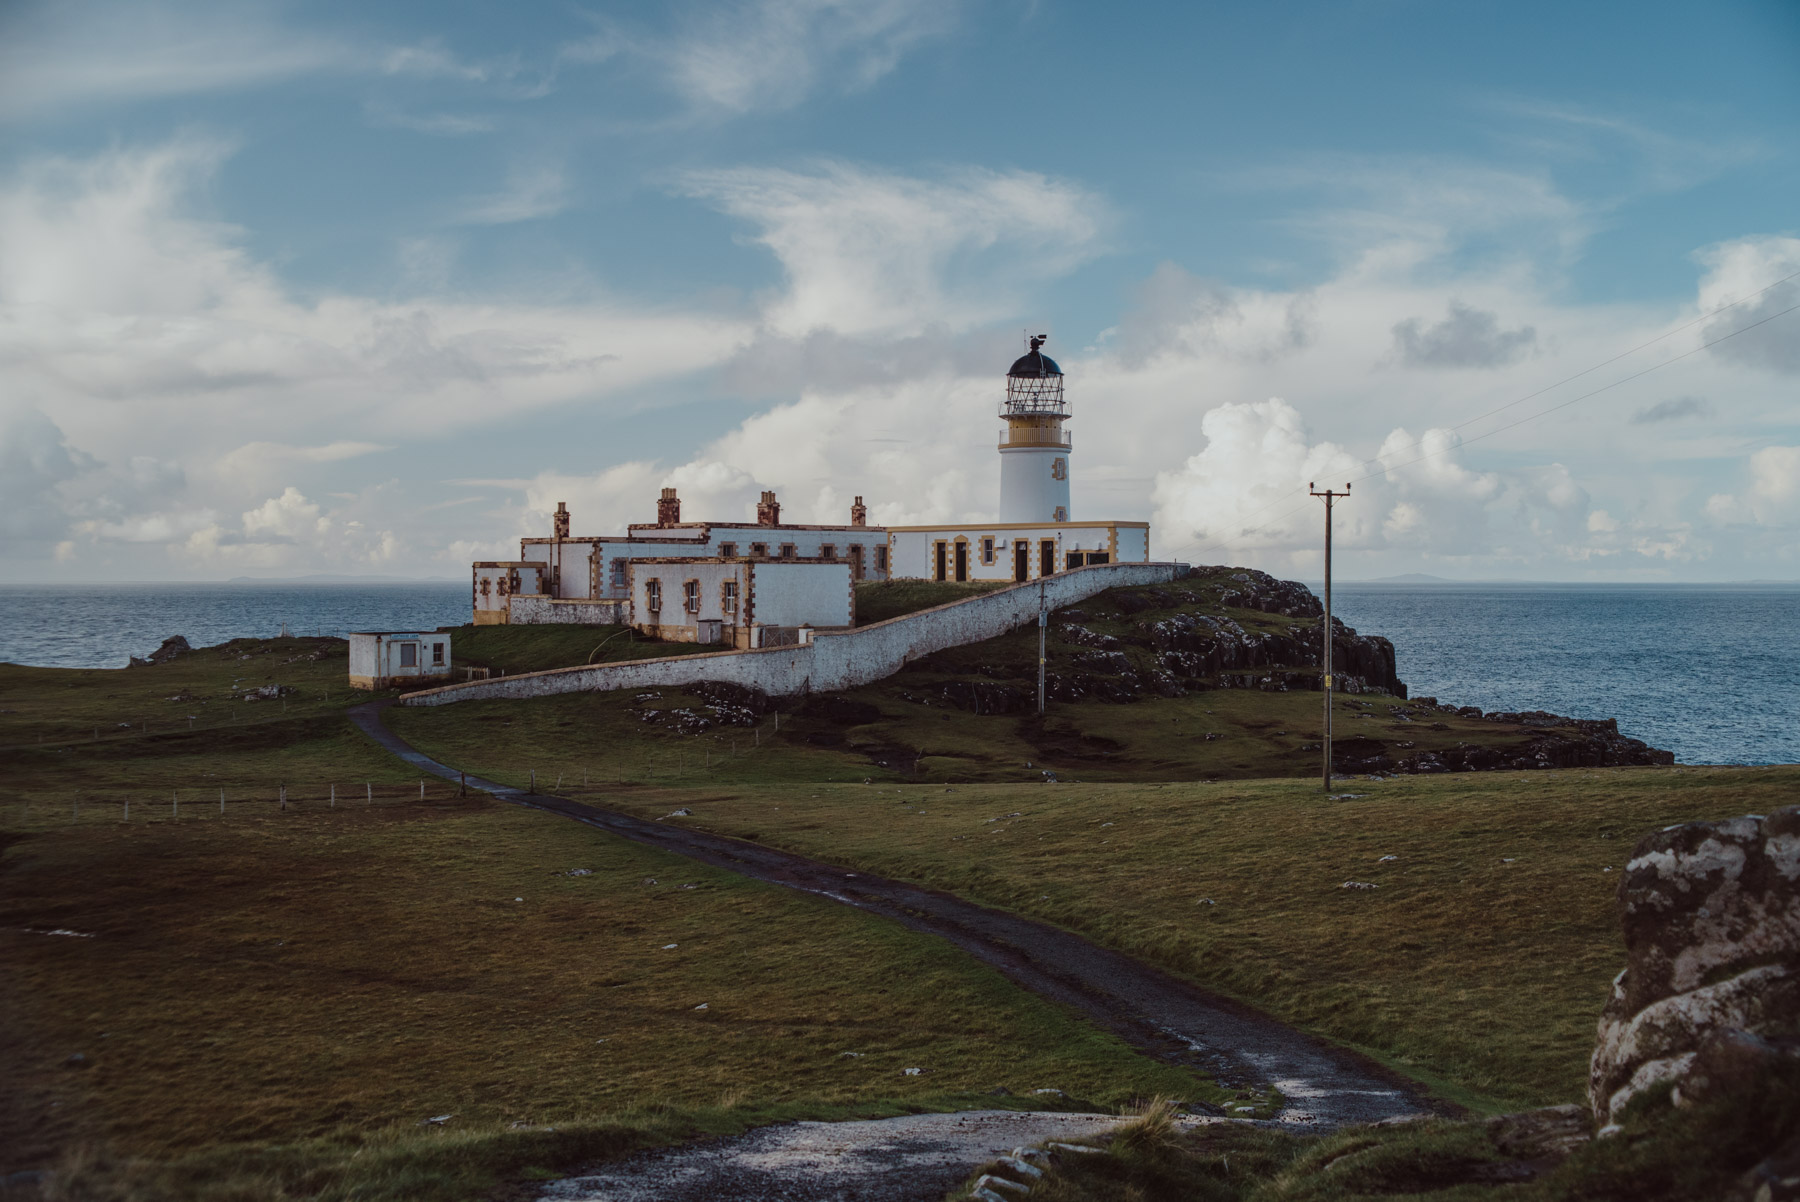 Scottish Highland and castles, and lighthouse